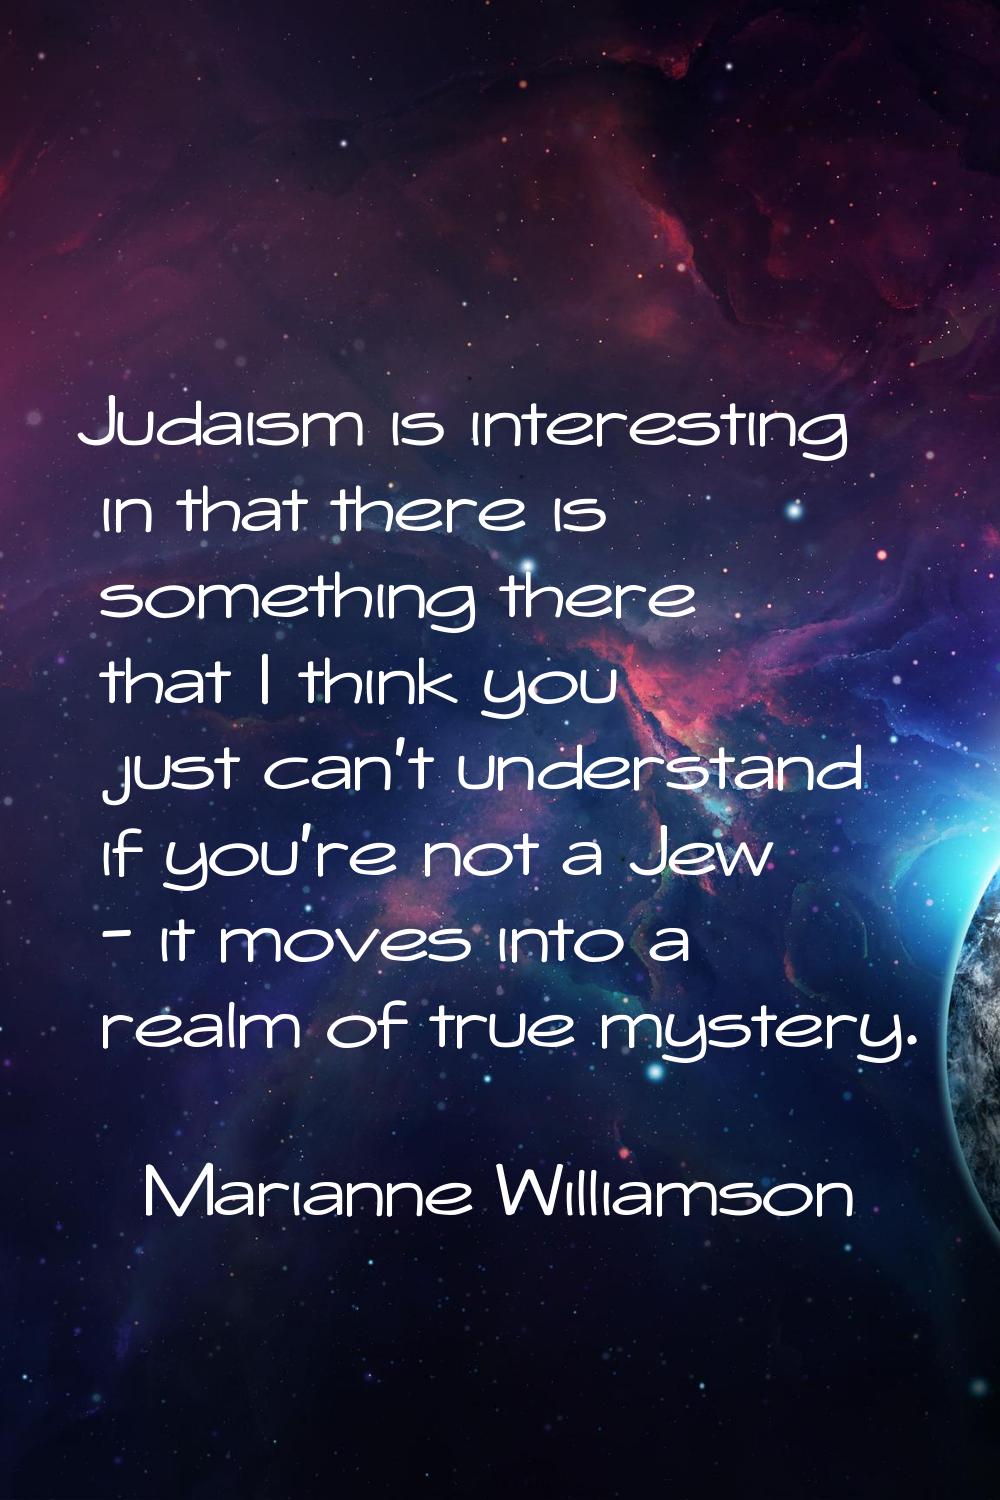 Judaism is interesting in that there is something there that I think you just can't understand if y